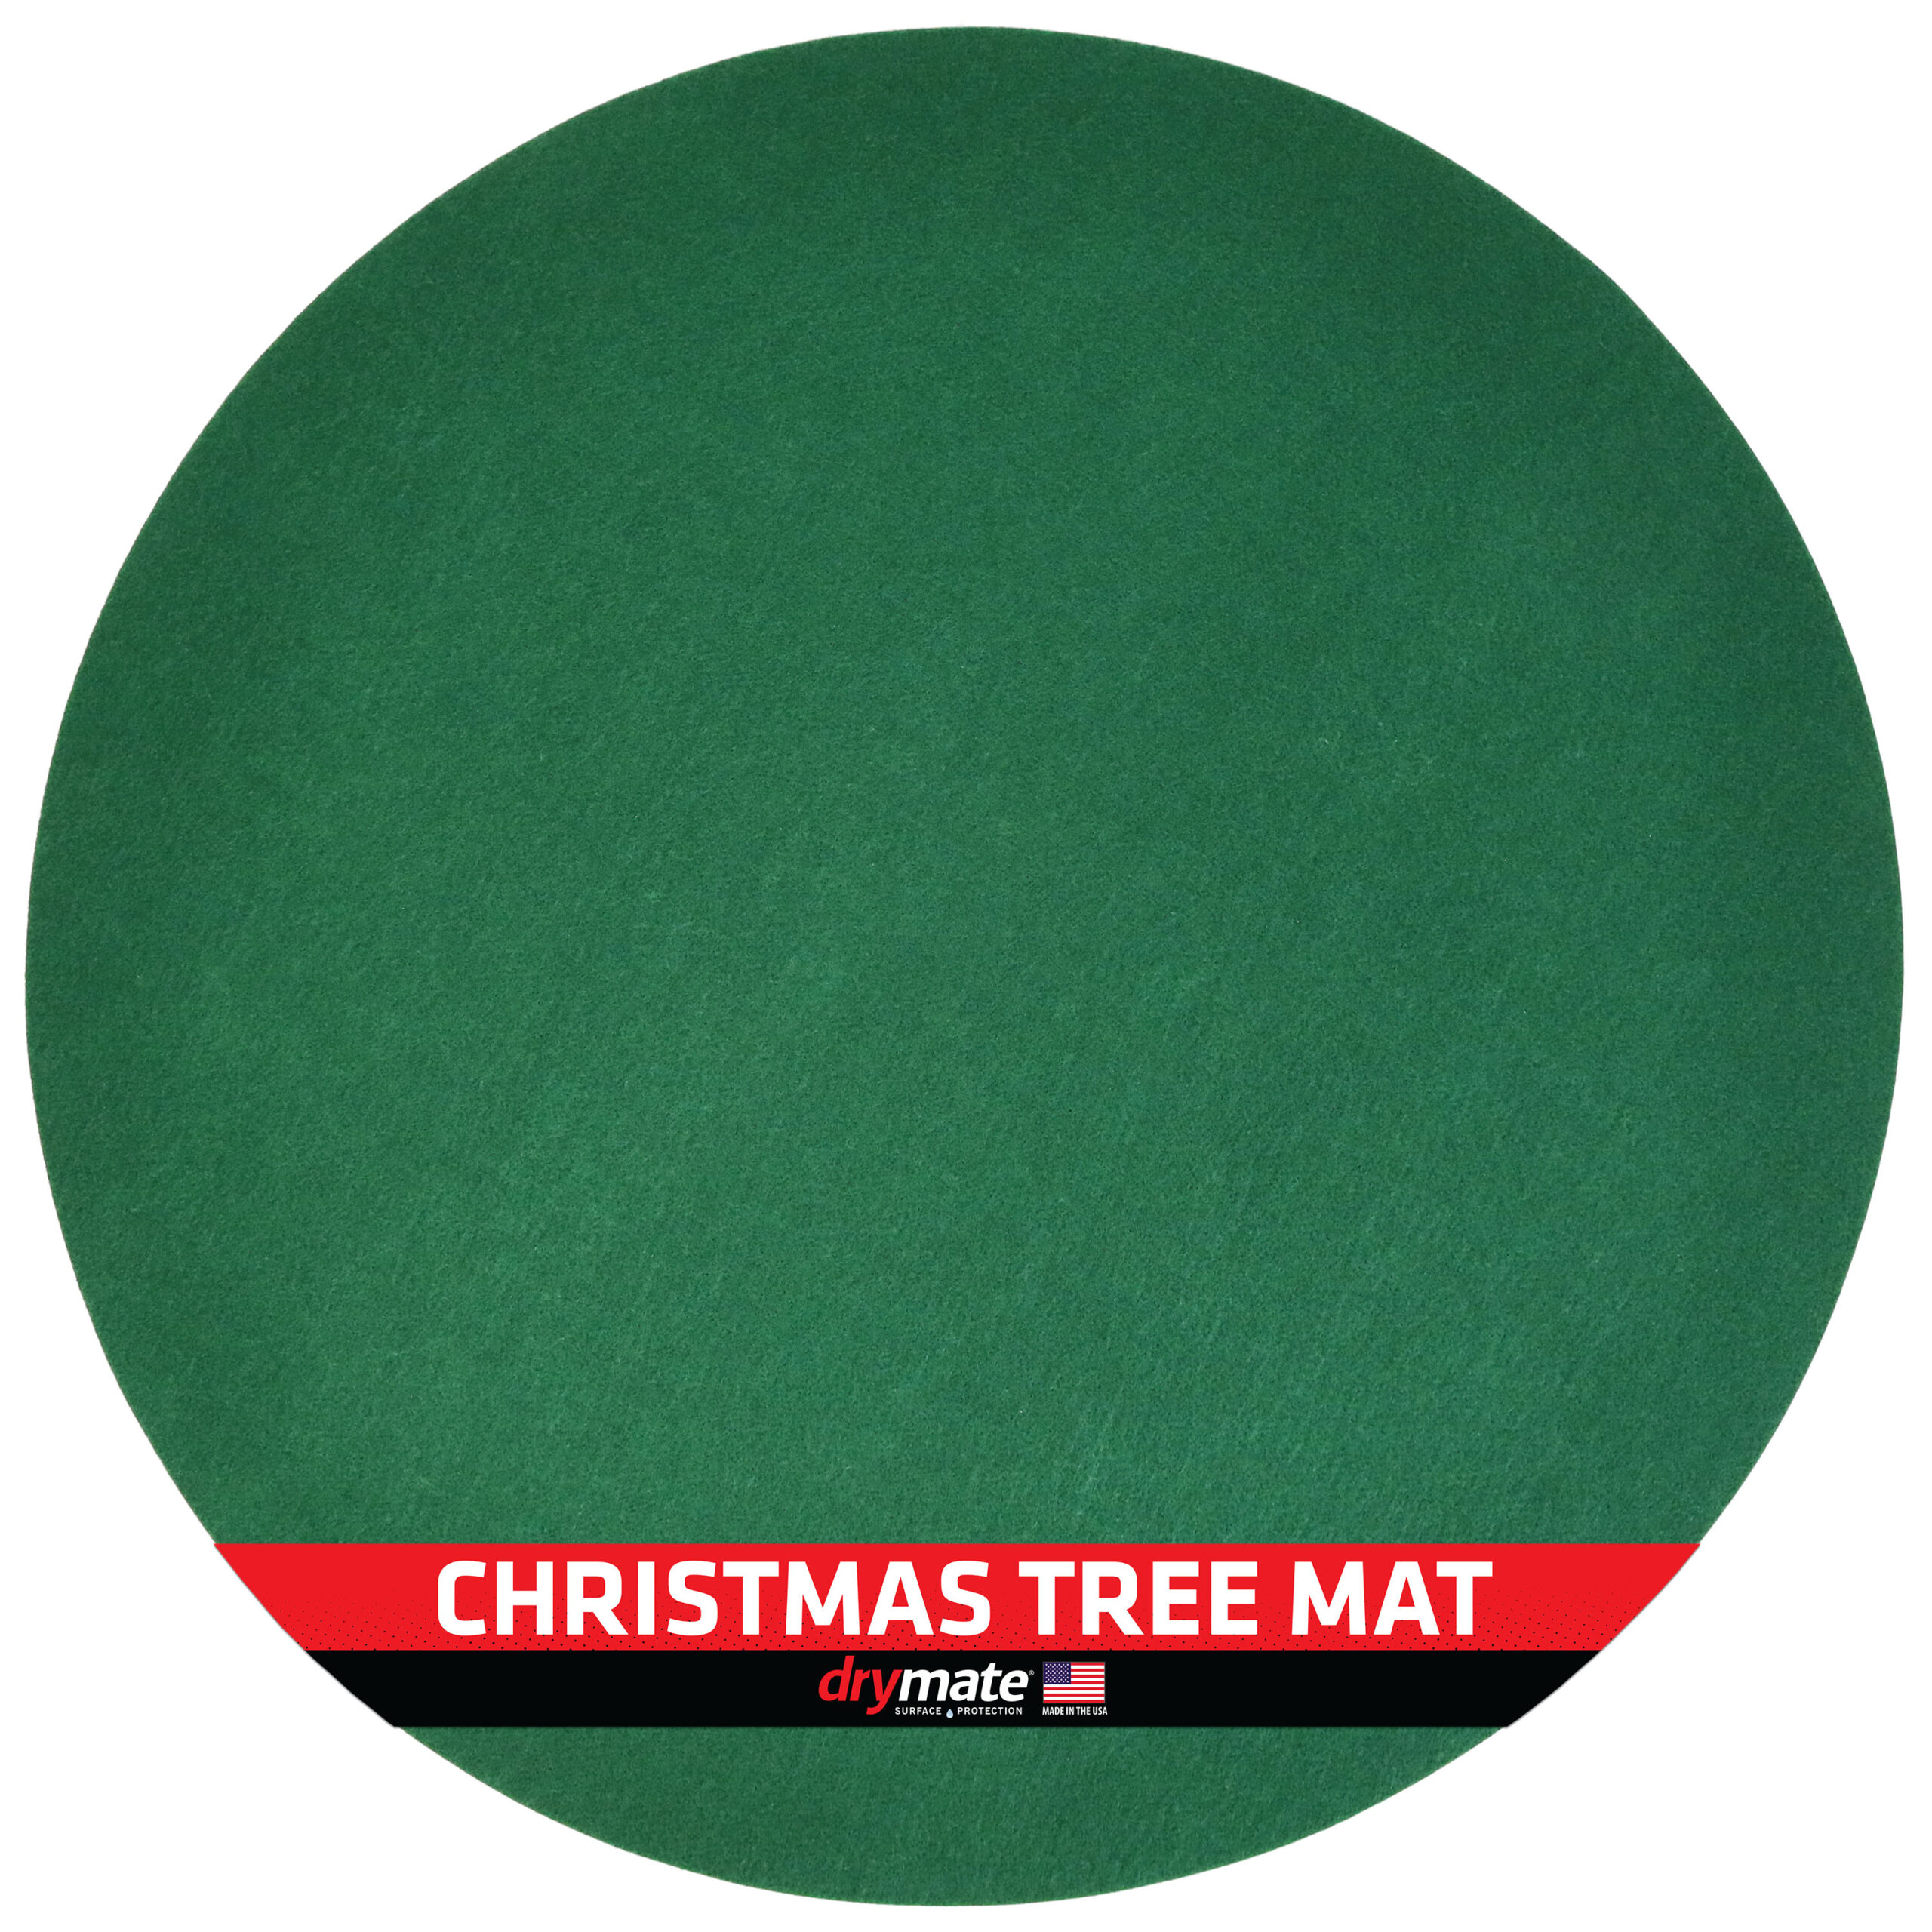 https://drymate.com/wp-content/uploads/2015/08/1-CTS28_LABEL-Christmas-Tree-Stand-Mat-absorbent-waterproof-usa-made-scaled.jpg